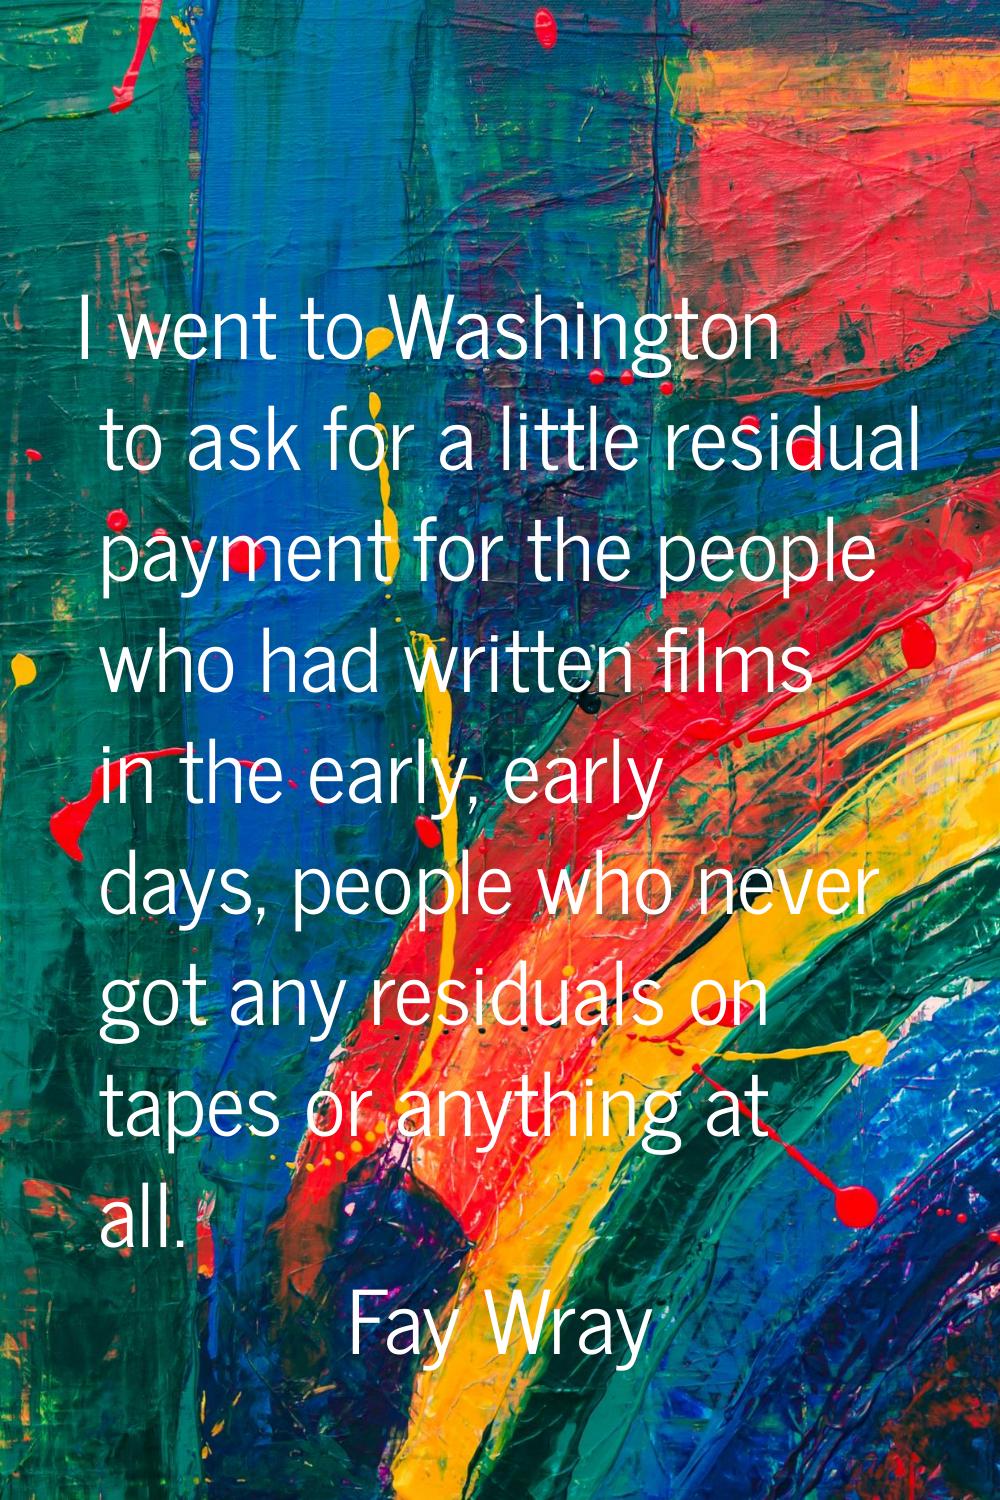 I went to Washington to ask for a little residual payment for the people who had written films in t